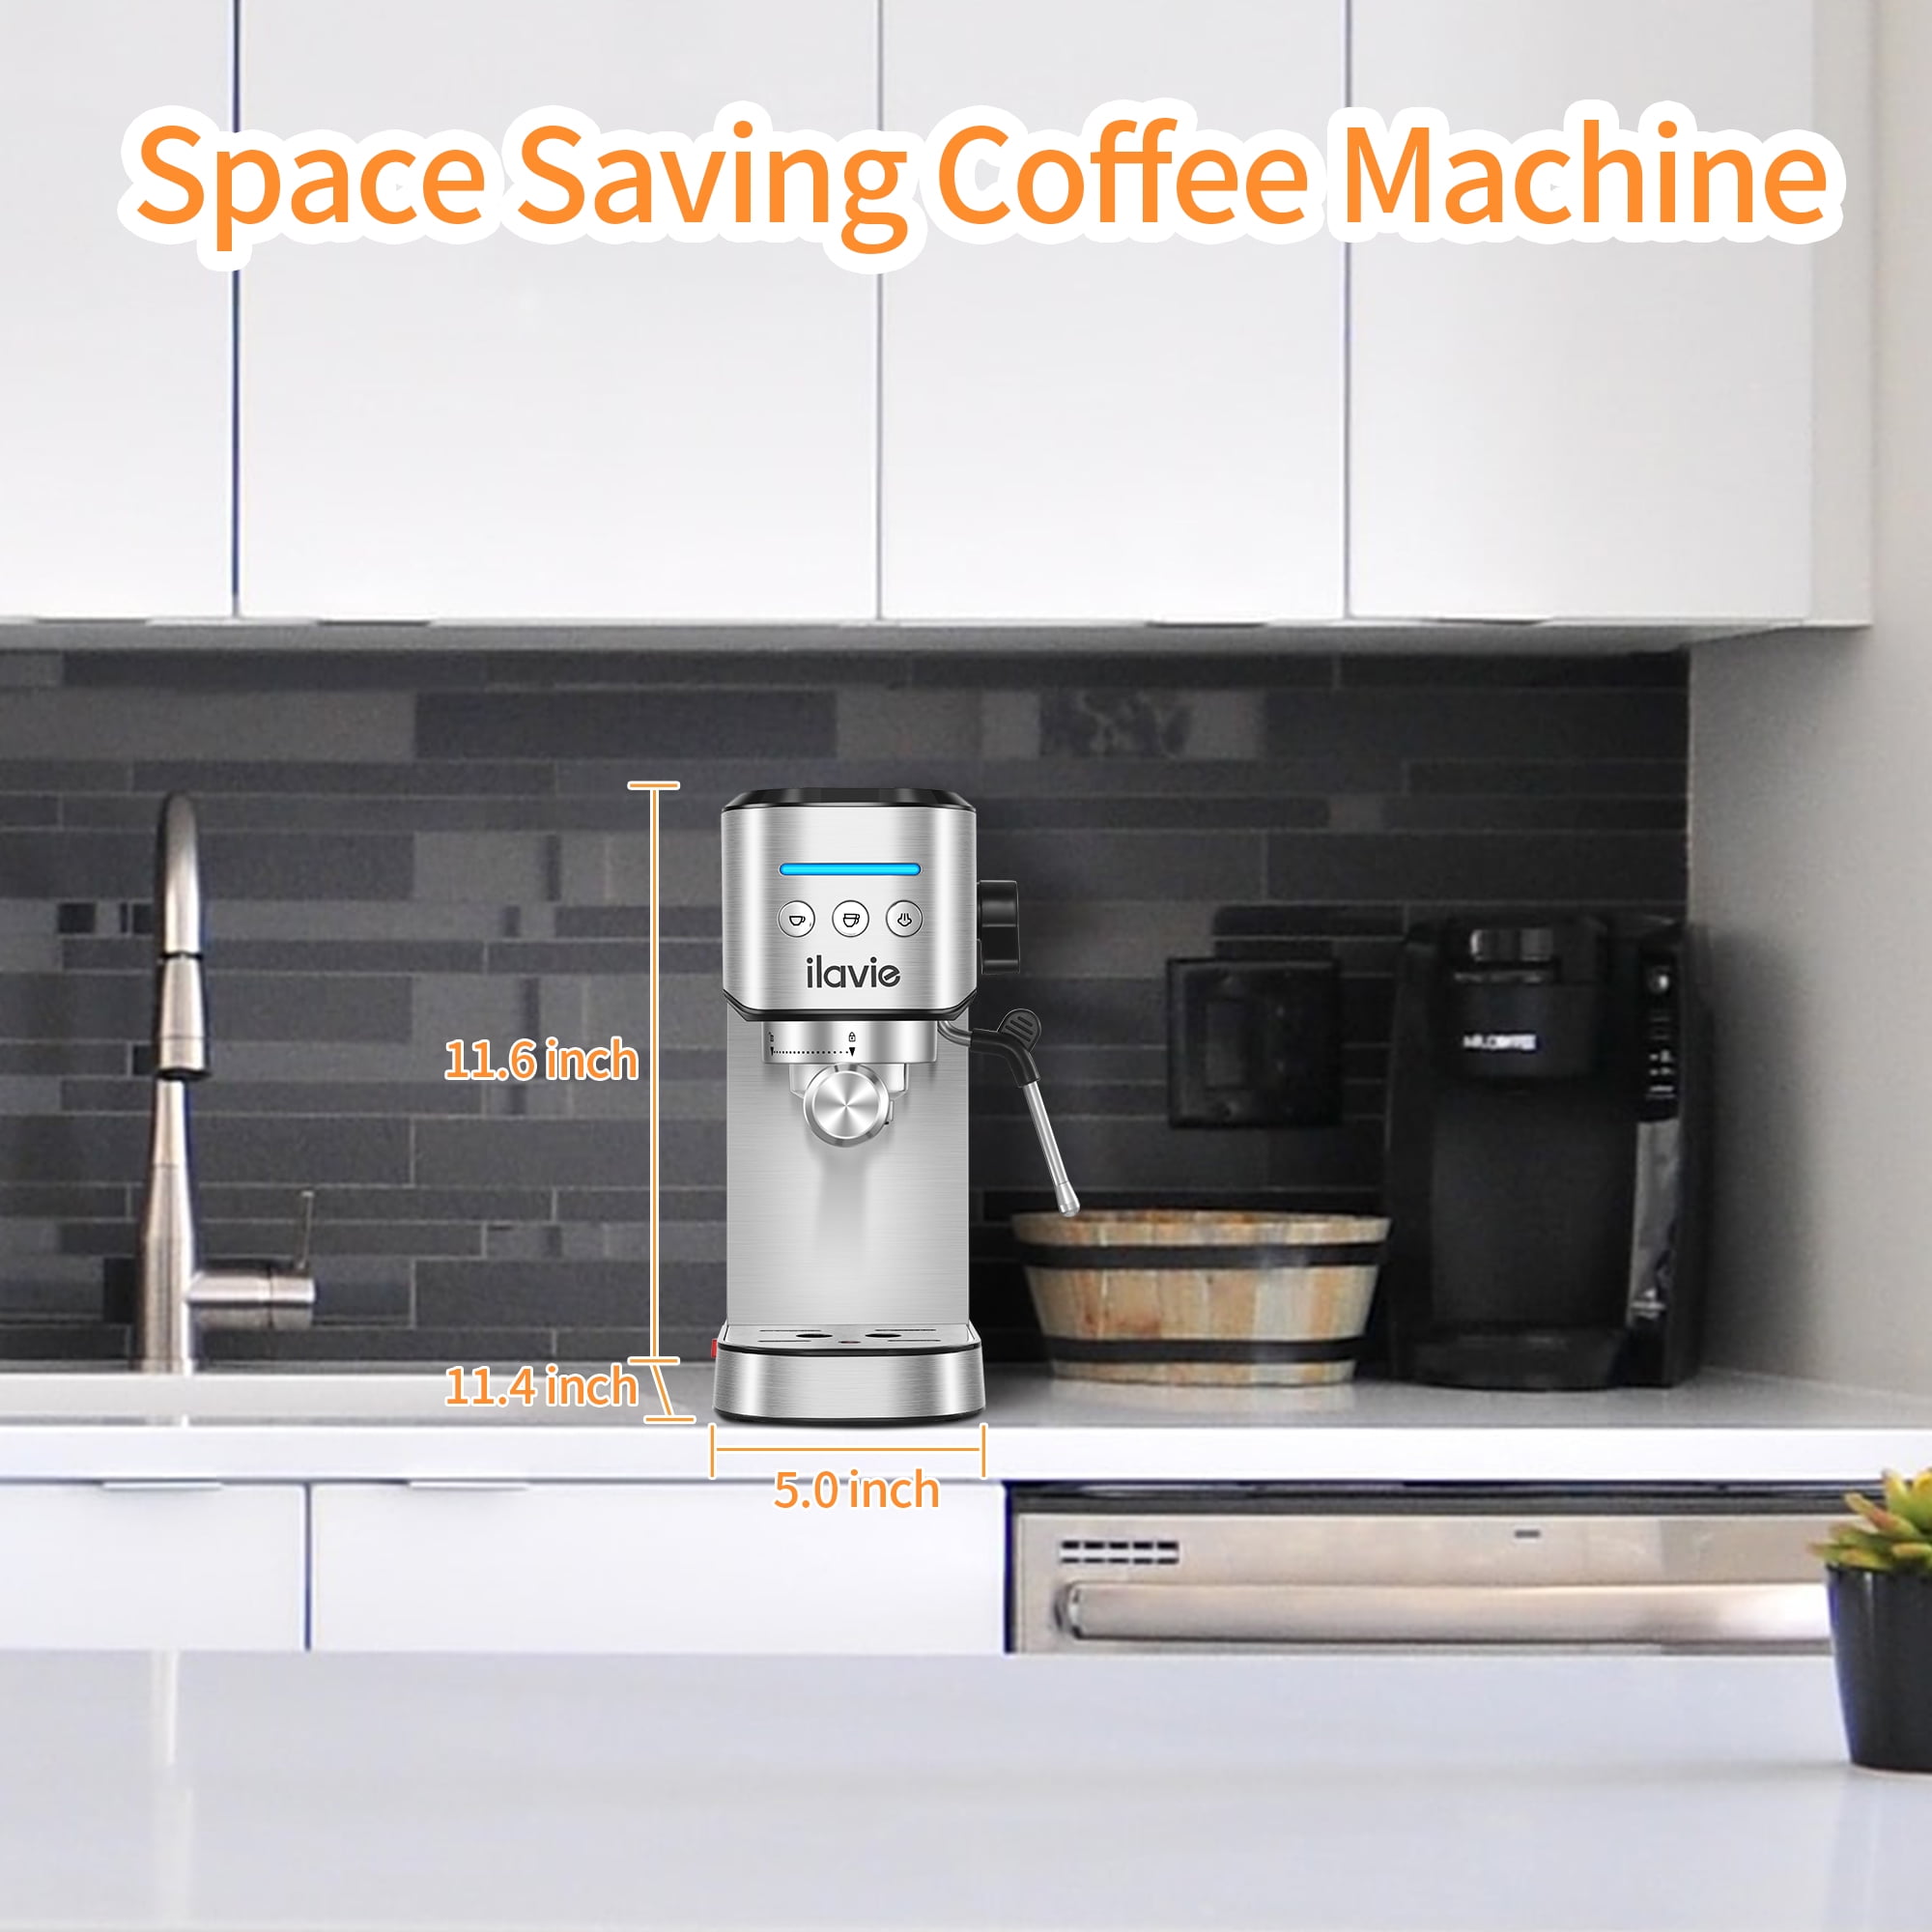 This $20 Space-Saving Coffee Machine Is the Perfect Size for My Tiny  Apartment